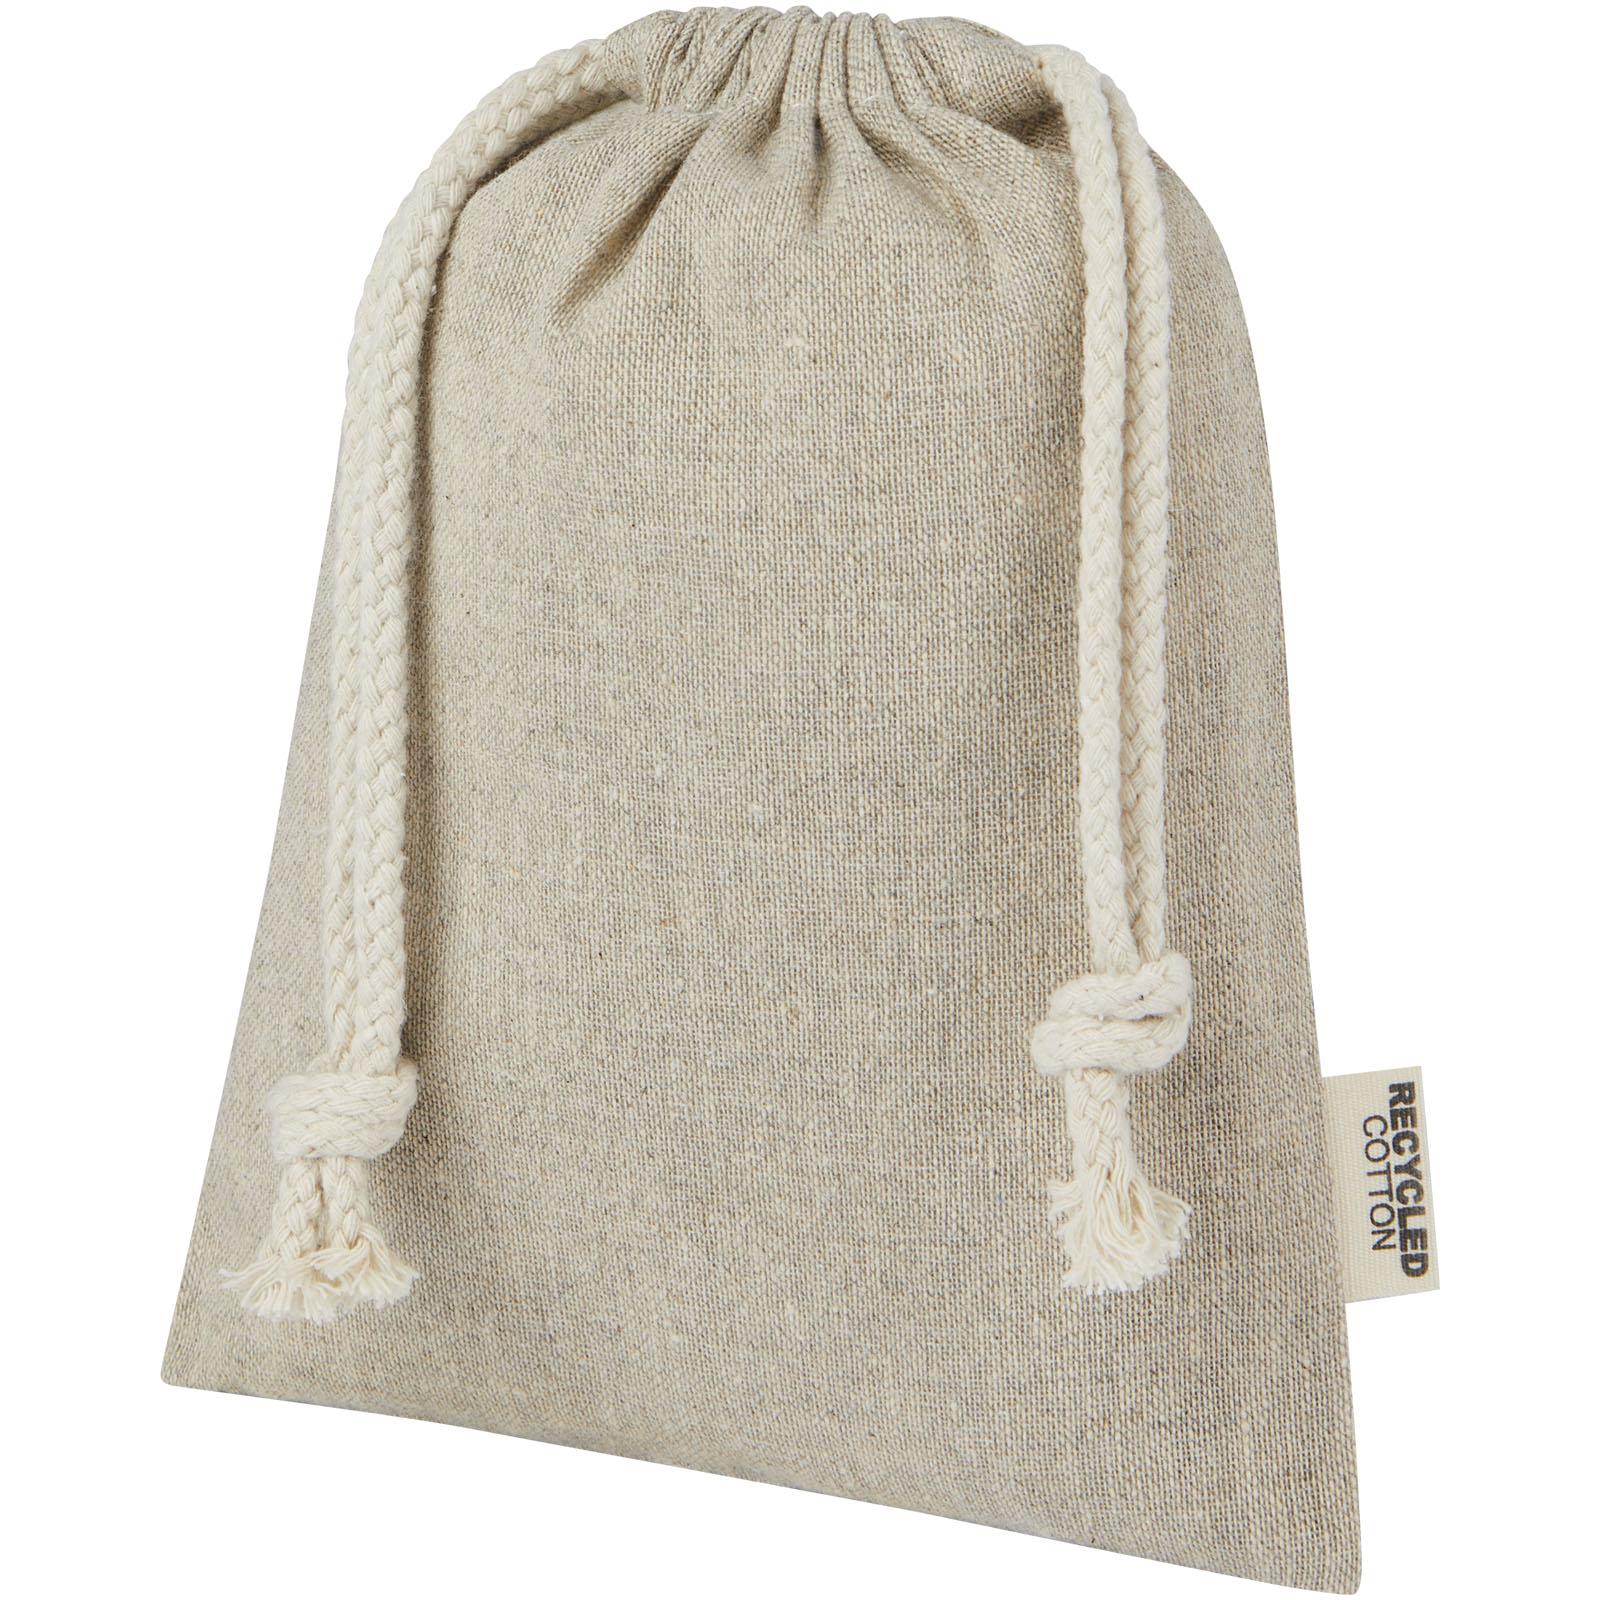 Bags - Pheebs 150 g/m² GRS recycled cotton gift bag small 0.5L